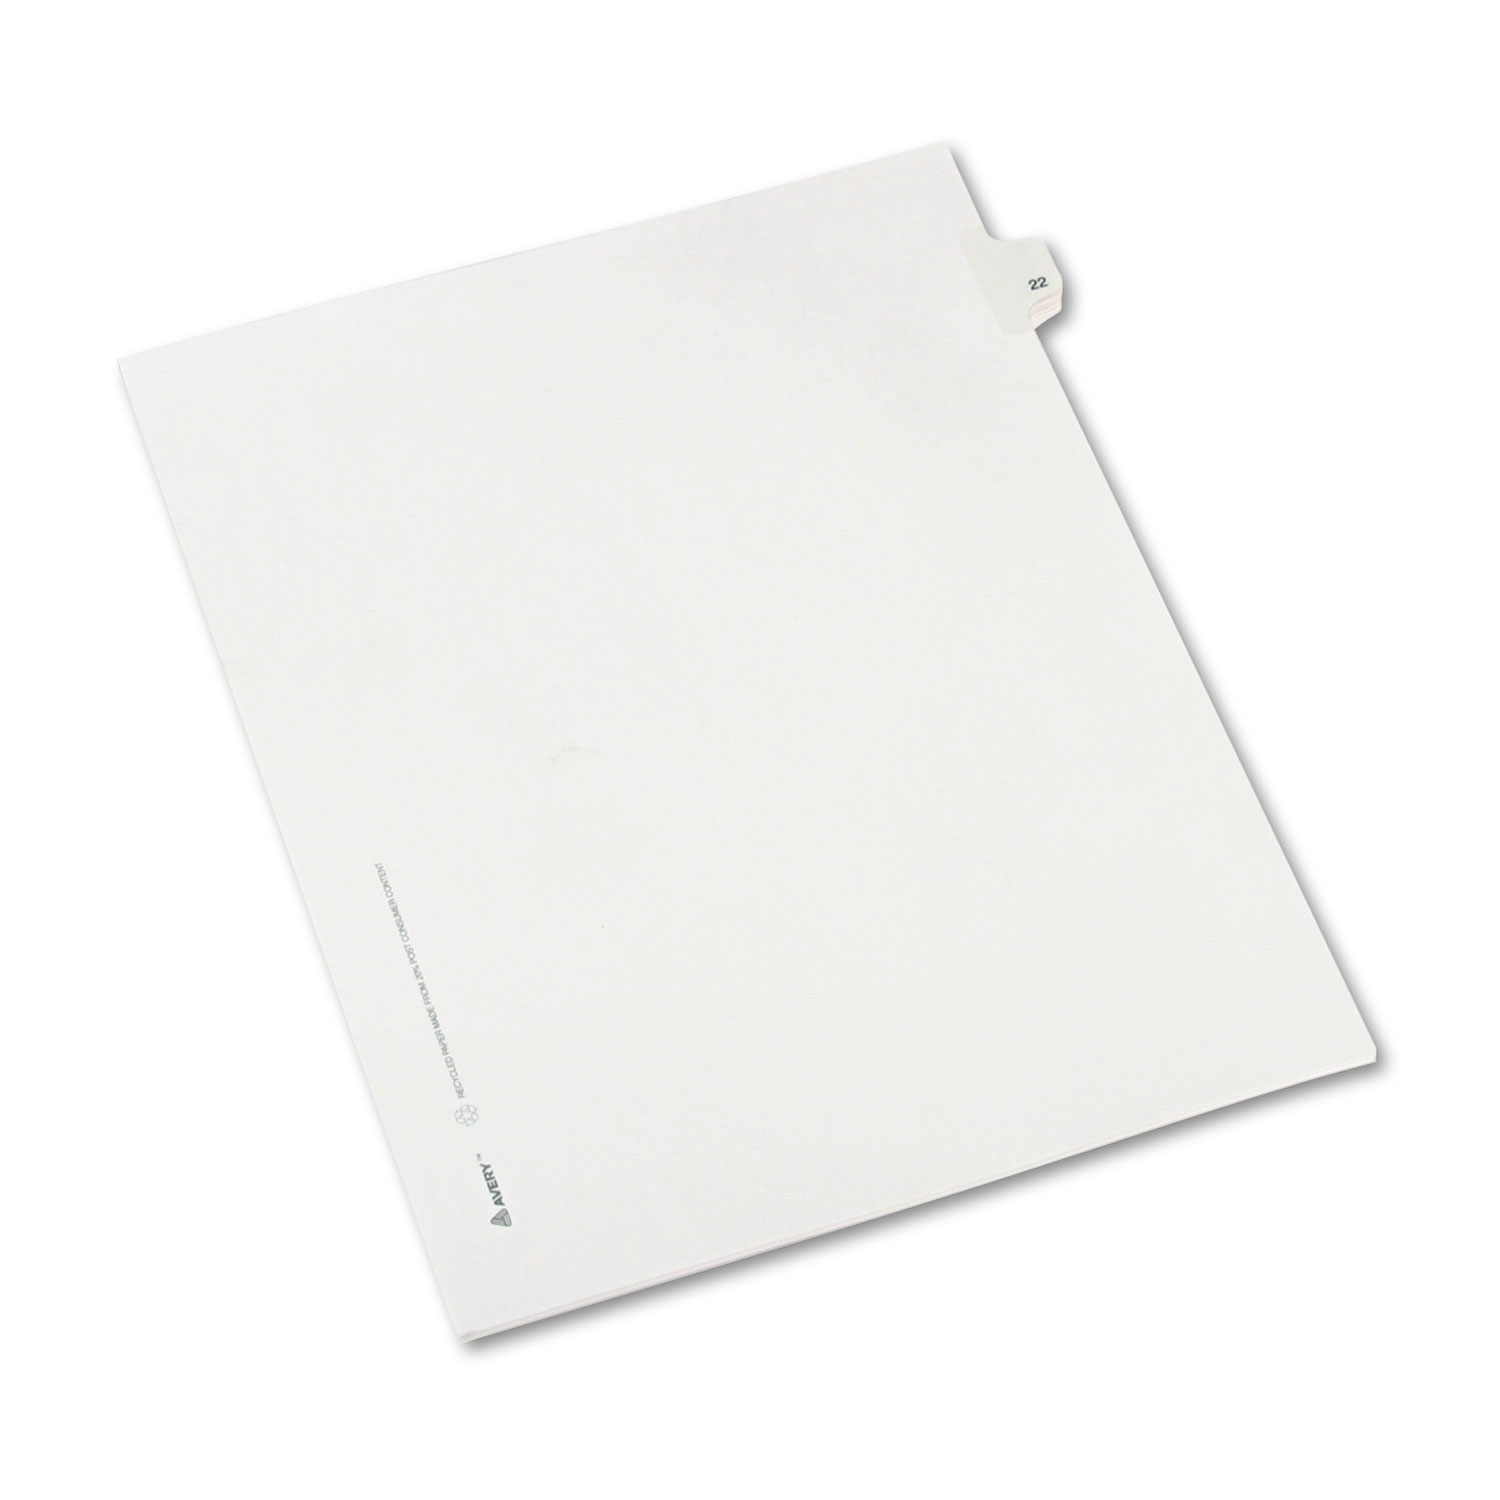  Avery 82220 Preprinted Legal Exhibit Side Tab Index Dividers, Allstate Style, 10-Tab, 22, 11 x 8.5, White, 25/Pack (AVE82220) 